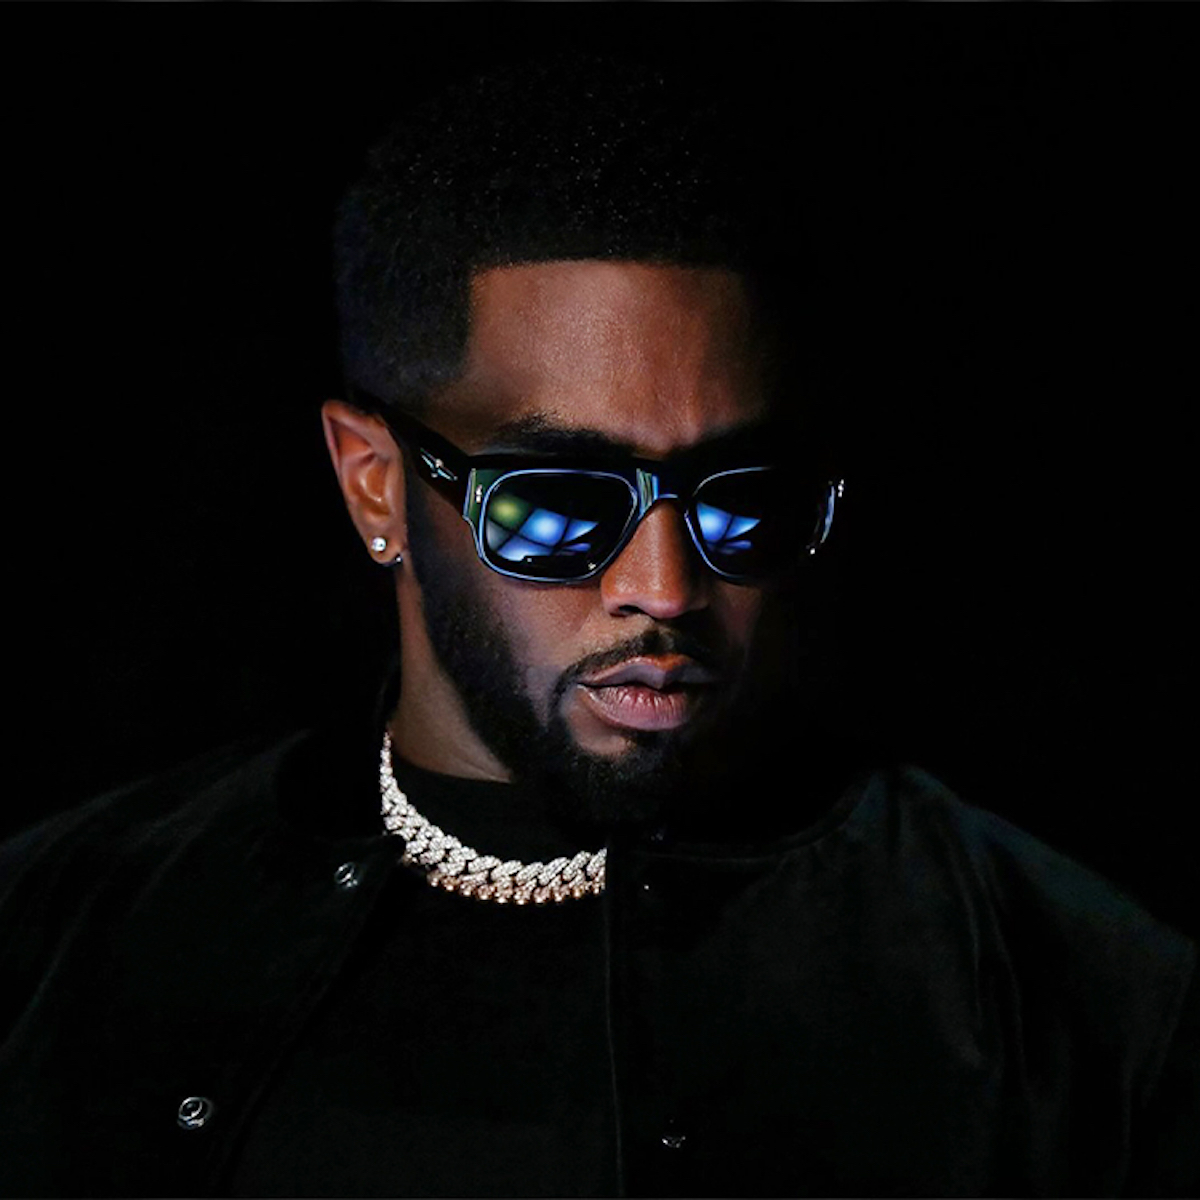 Diddy's New Album to Feature Justin Bieber, The Weeknd: List of